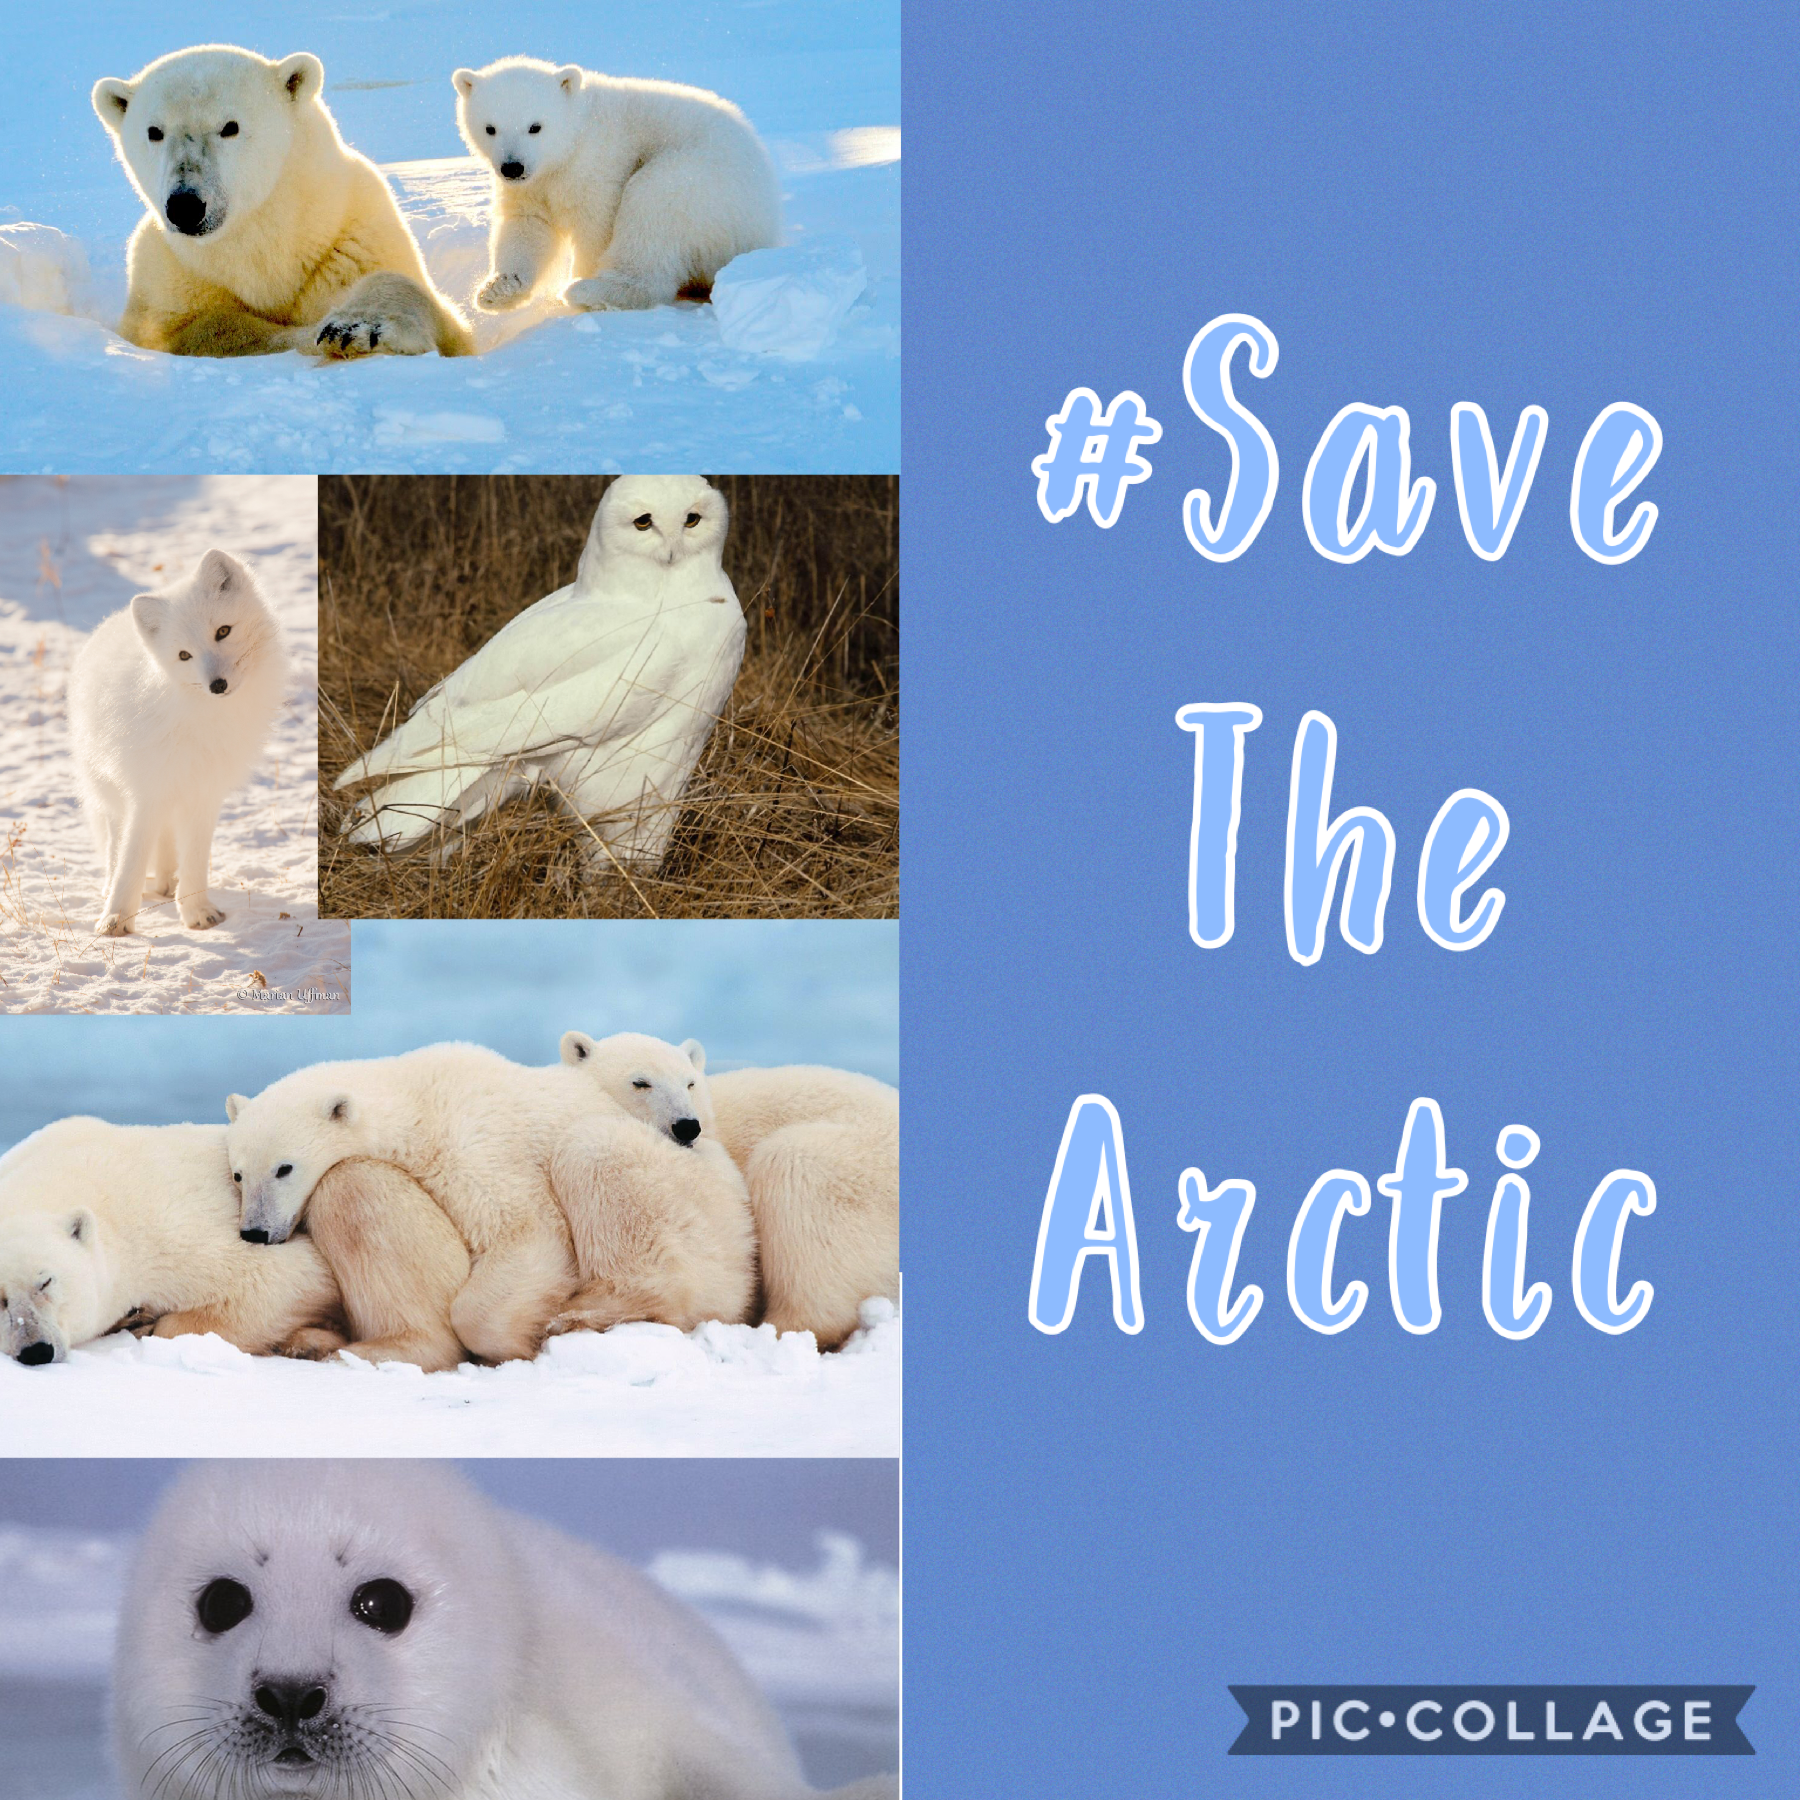 Global warming is affecting the earth by destroying the home for Polar Bears, Arctic Foxes, Snowy Owls, Seals, and other arctic animals. It isn’t safe. Some things you can do is donate money, and try using things less that were made in factories releasing